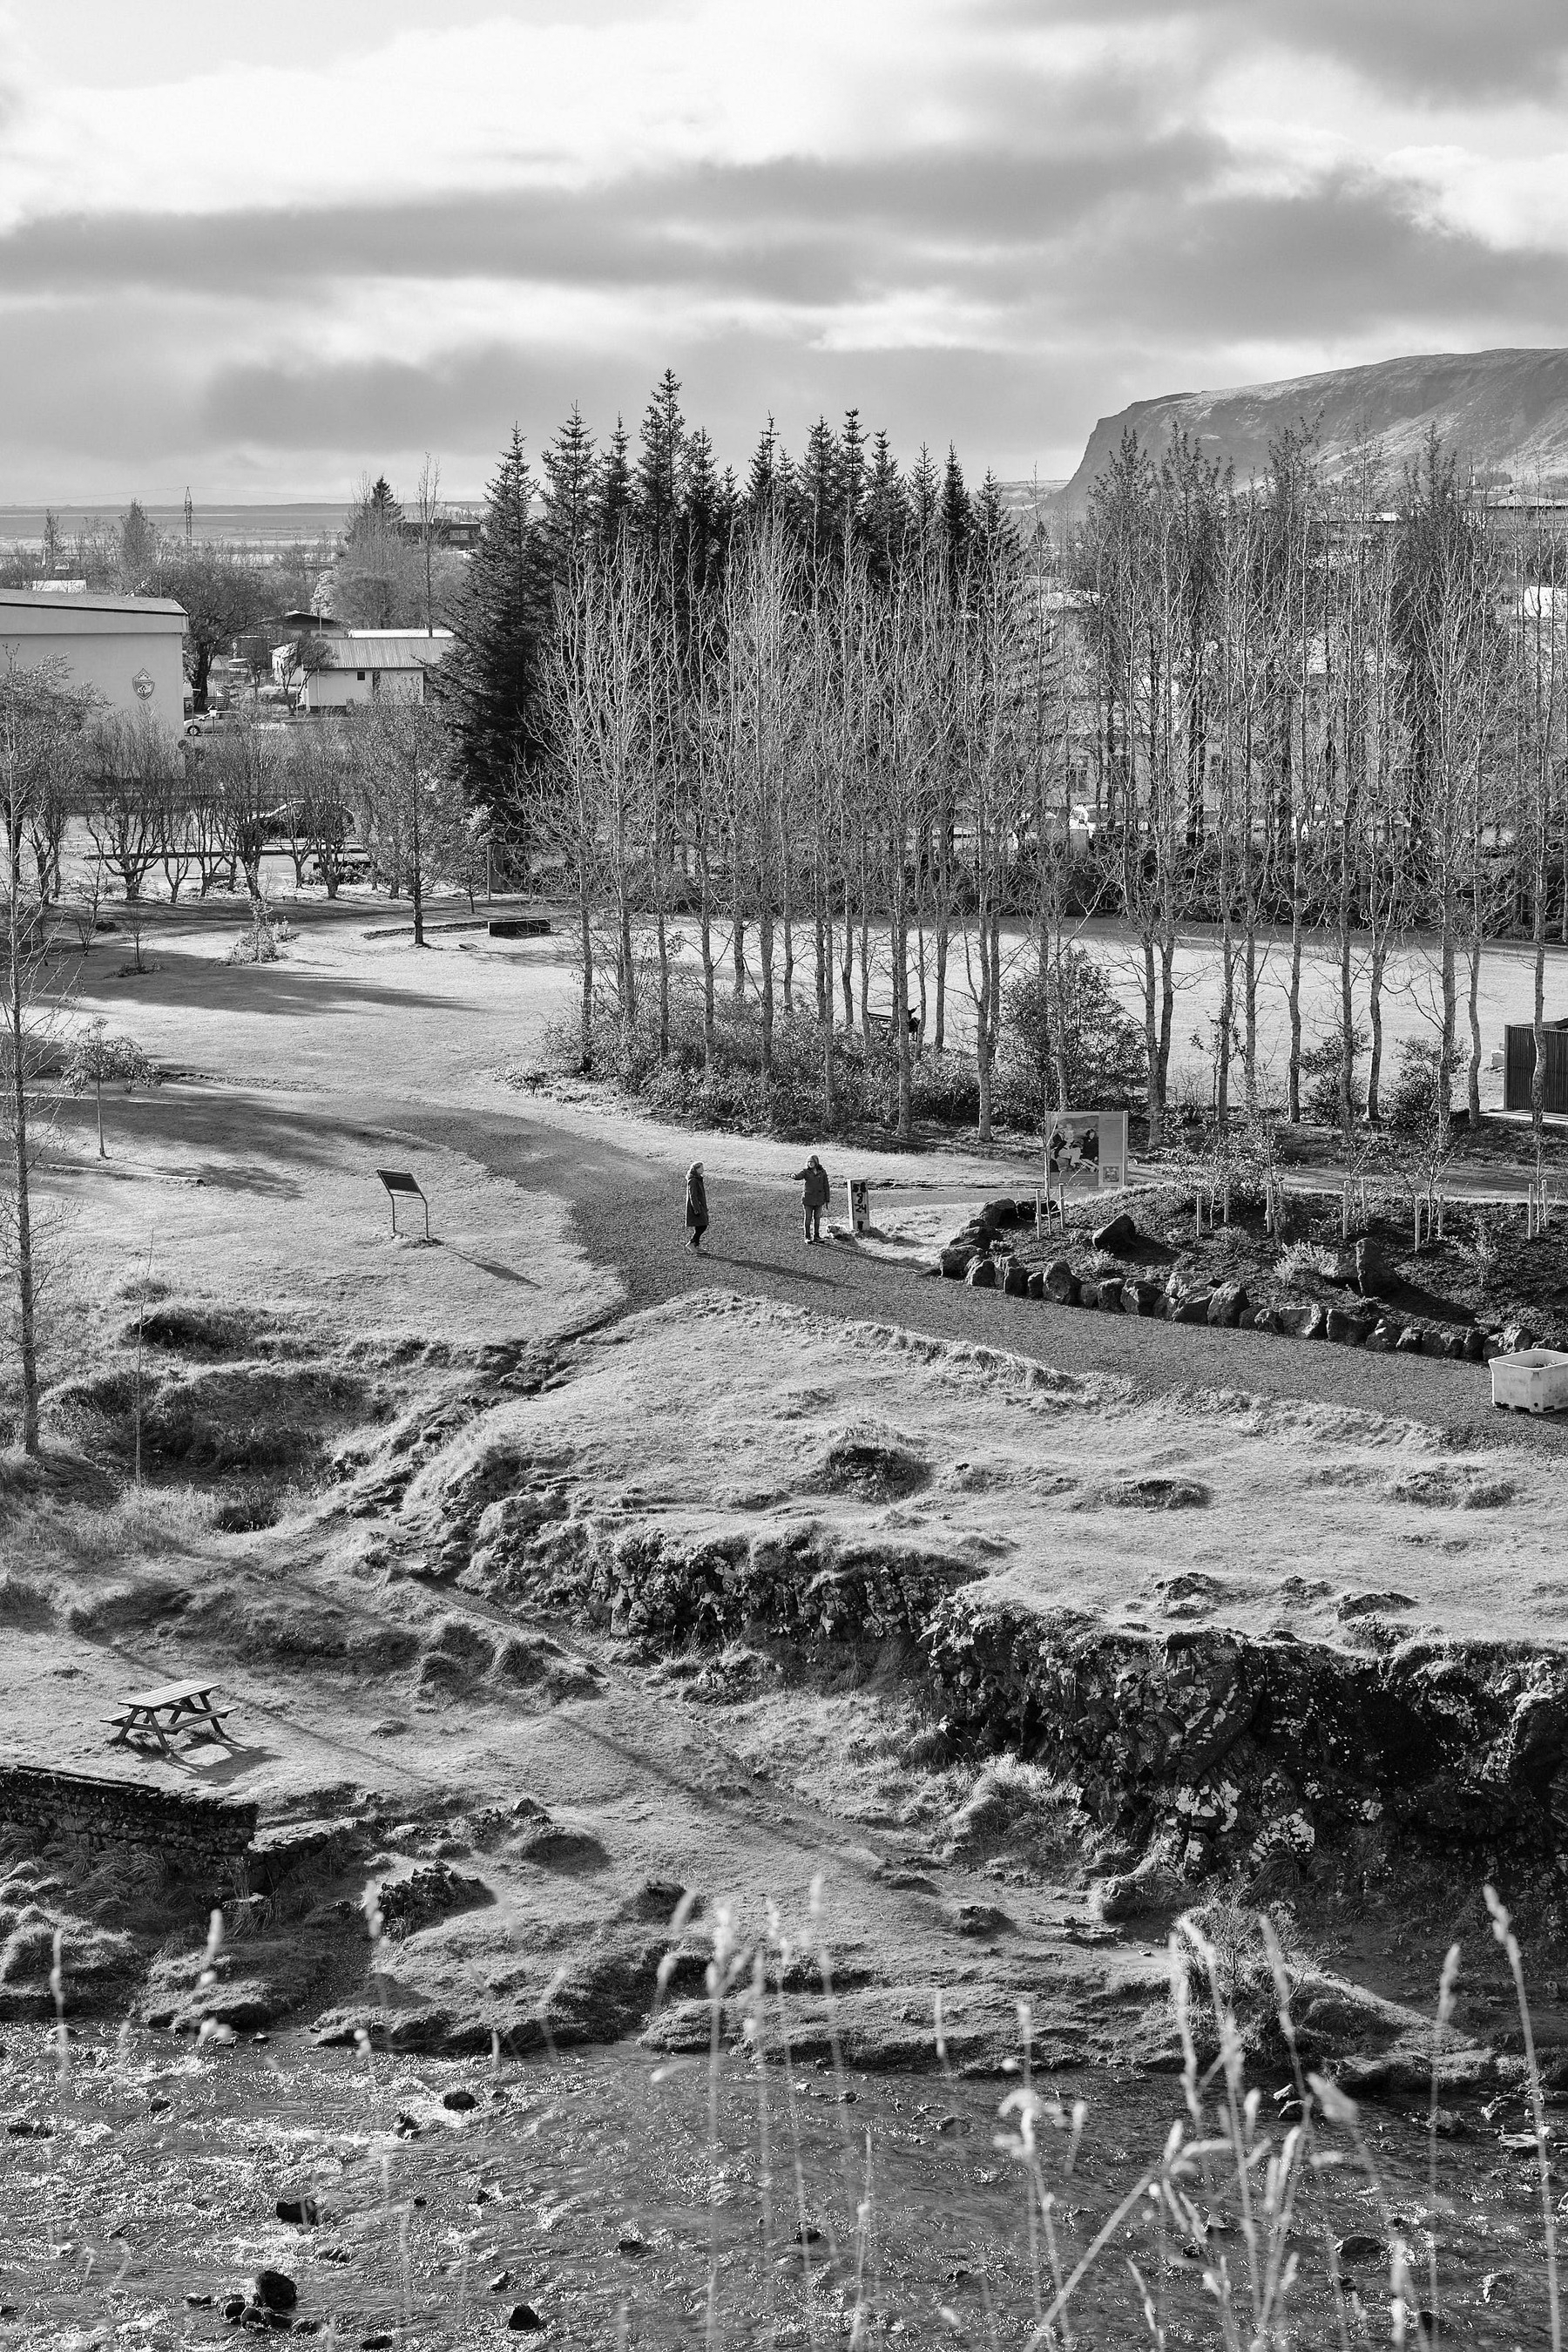 In the distance, two people are walking together through a park in Hveragerði. One is pointing something out for the other.